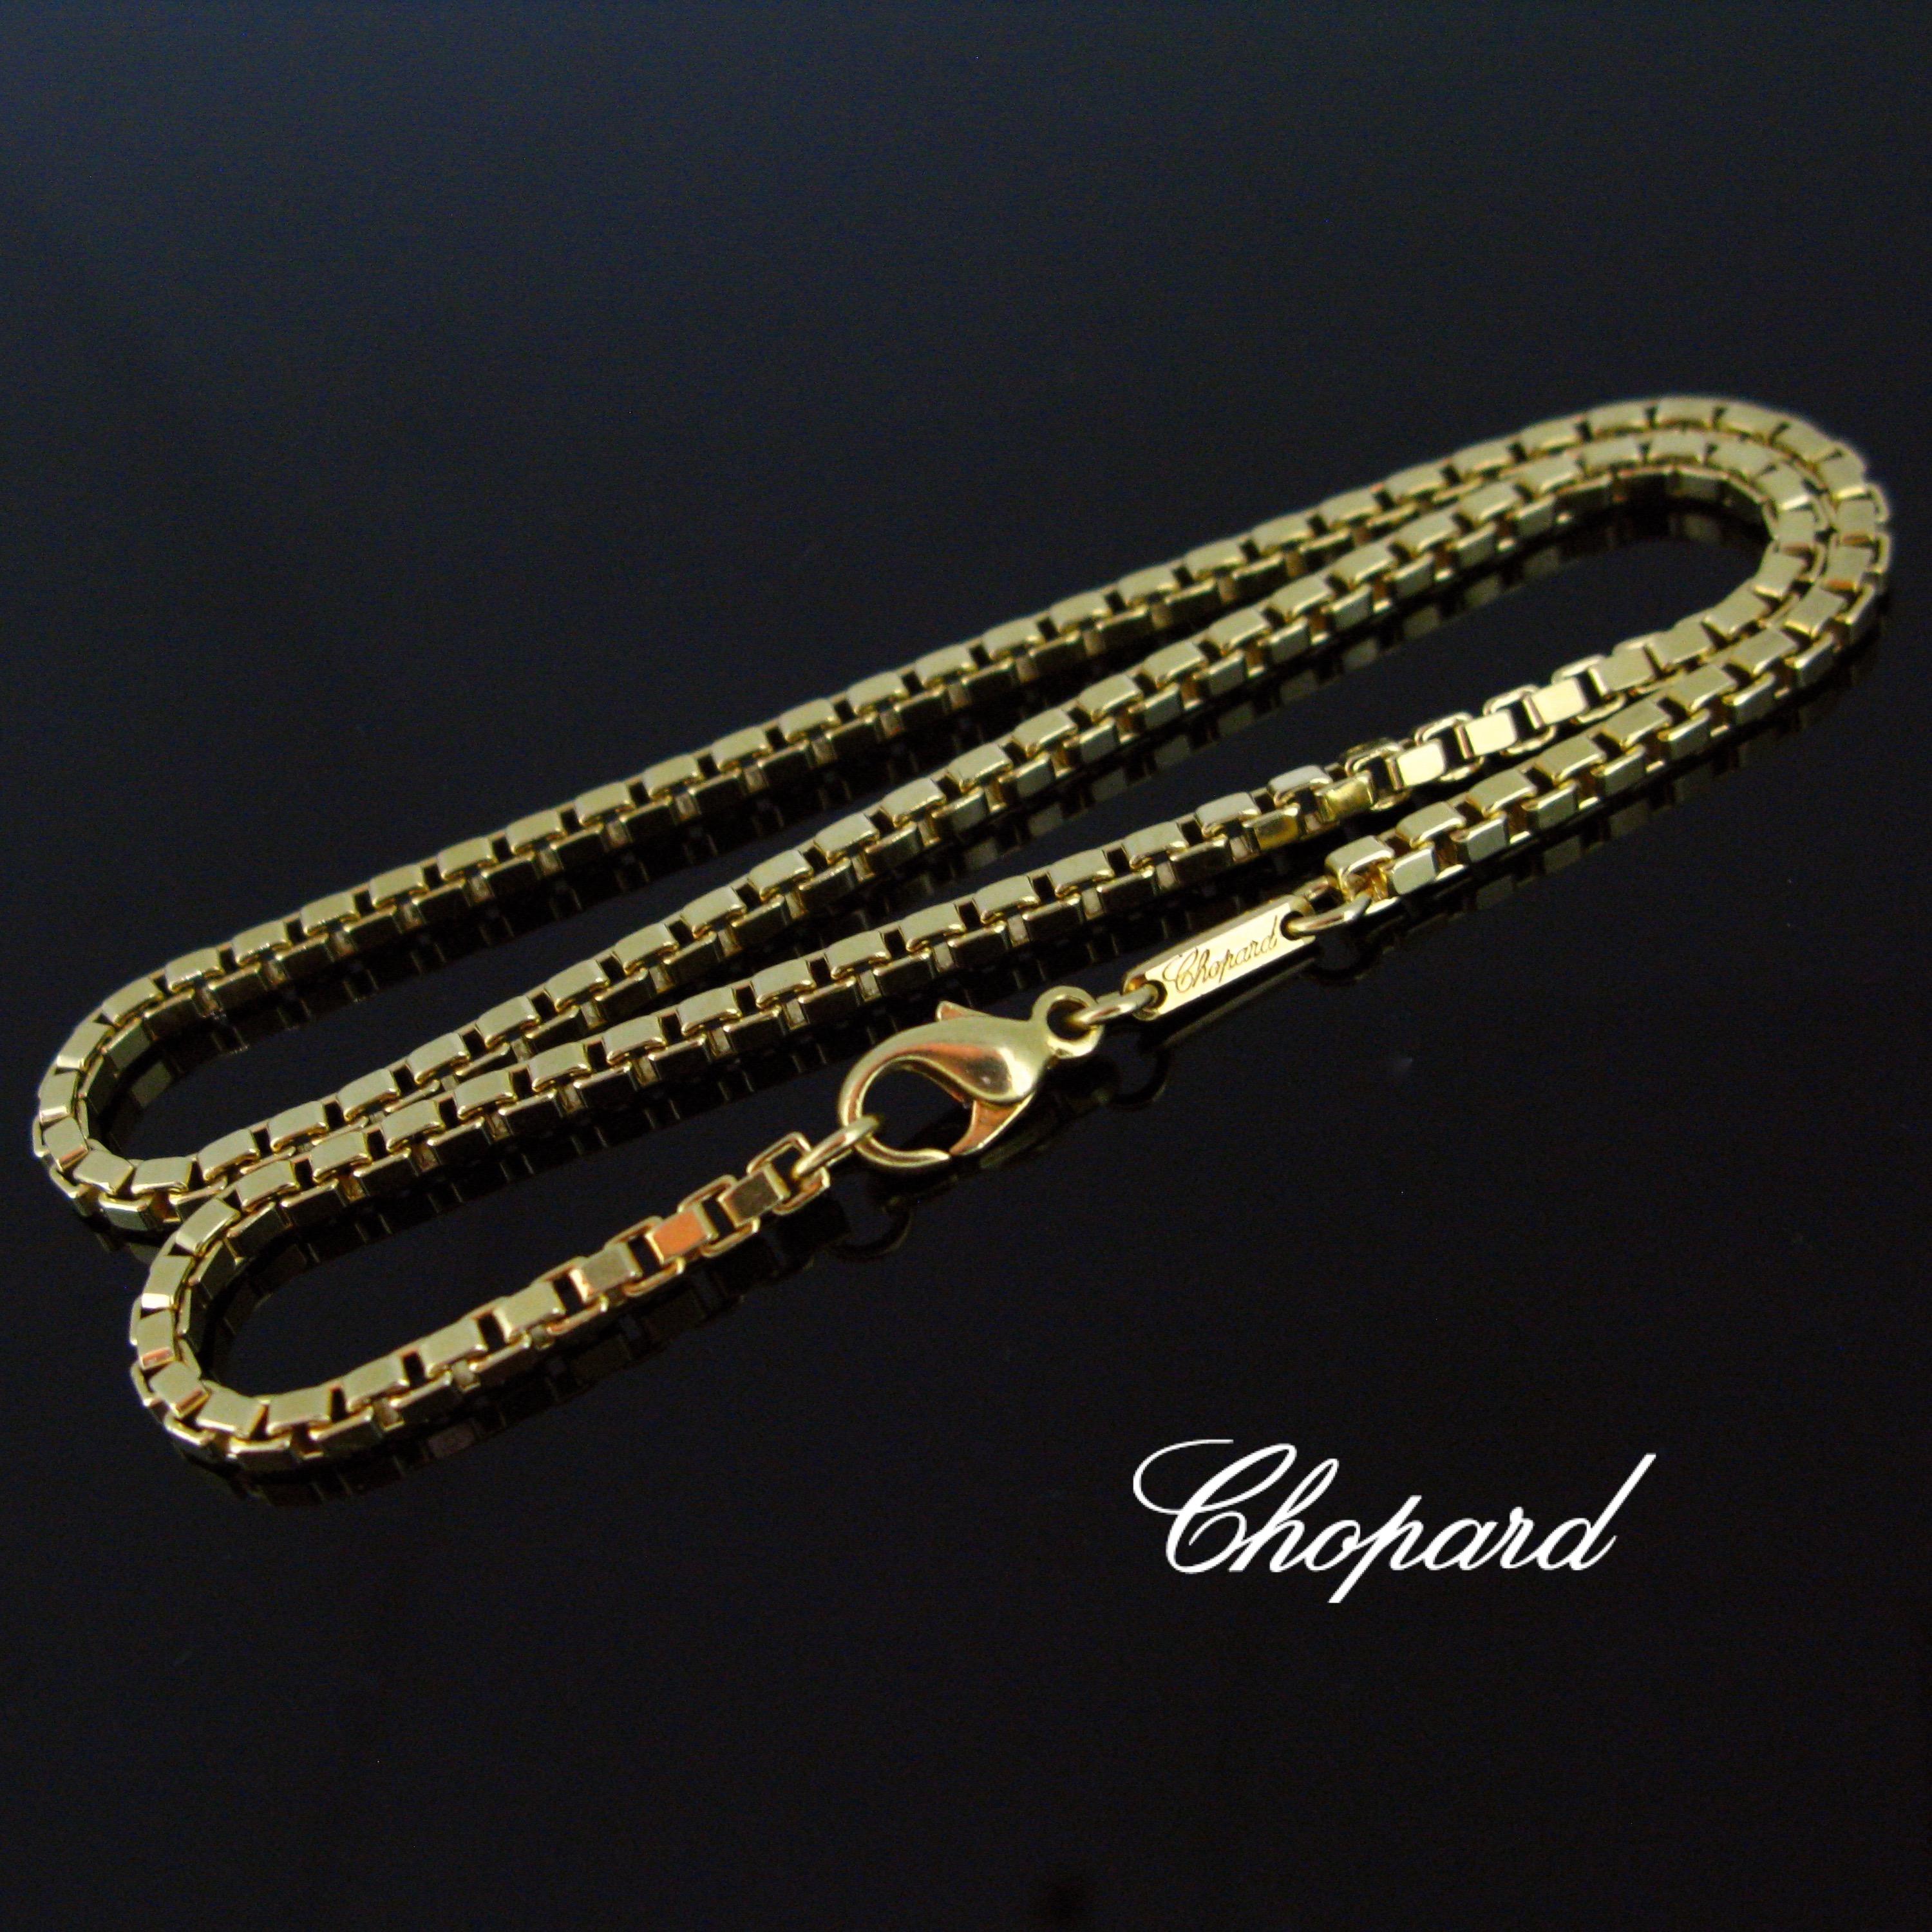 This elegant chain is made in 18kt yellow gold, it weighs 33,4gr. It is signed “Chopard” in its beautiful font next to the clasp. It is very easy to wear everyday.  

Weight:	33,4gr

Metal:	18kt yellow